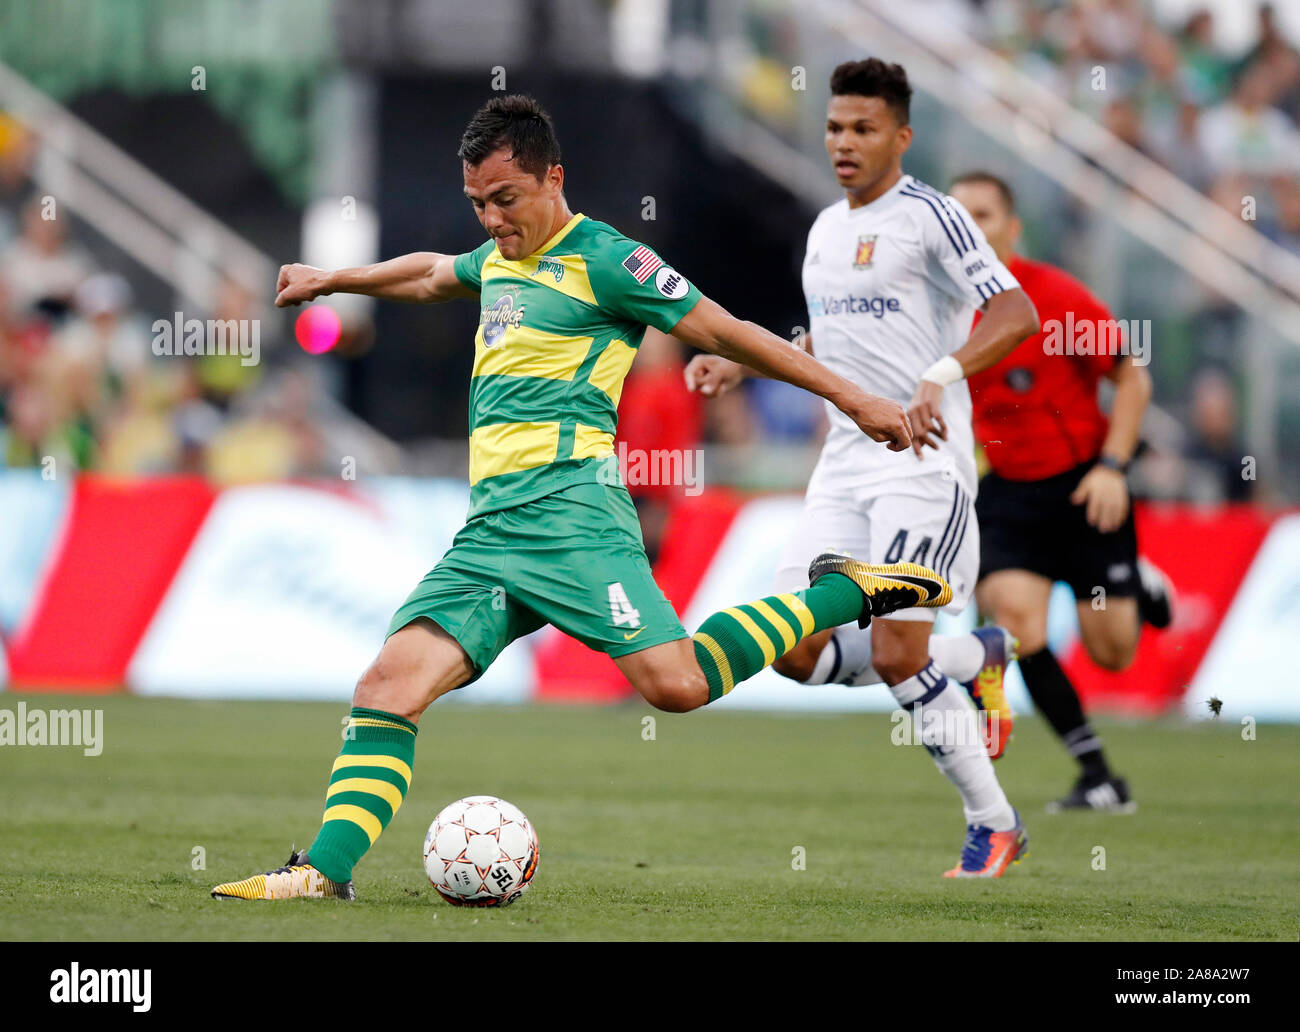 Marcel Schafer during the Tampa Bay Rowdies USL match against Real Monarchs SLC at Al Lang Field. Stock Photo